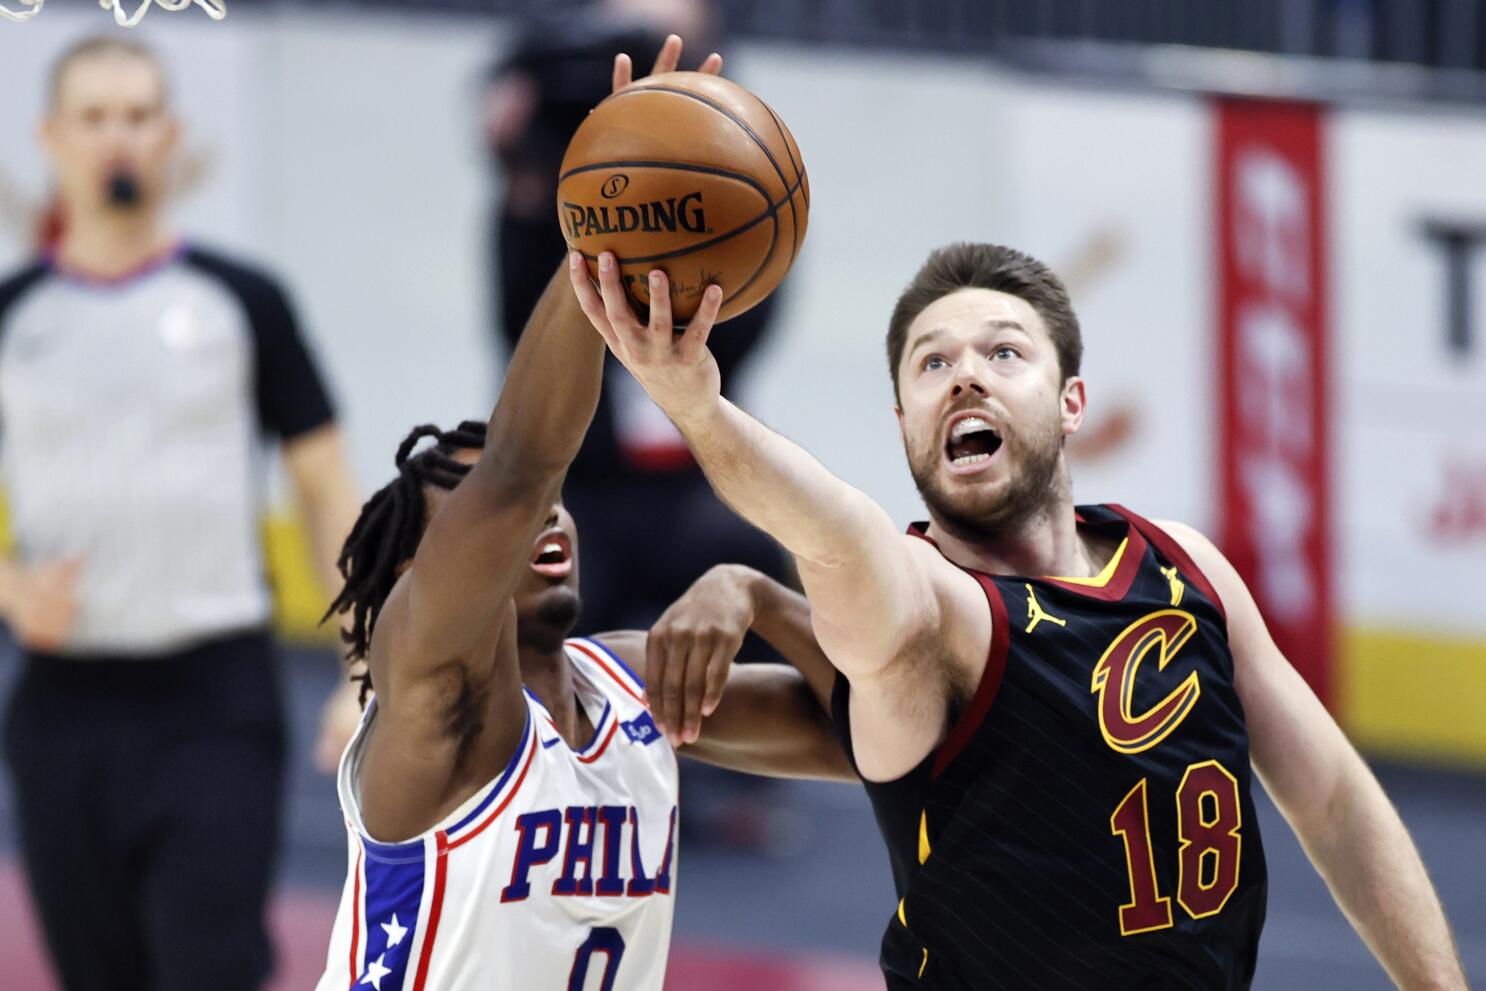 What Position Does Matthew Dellavedova Play?